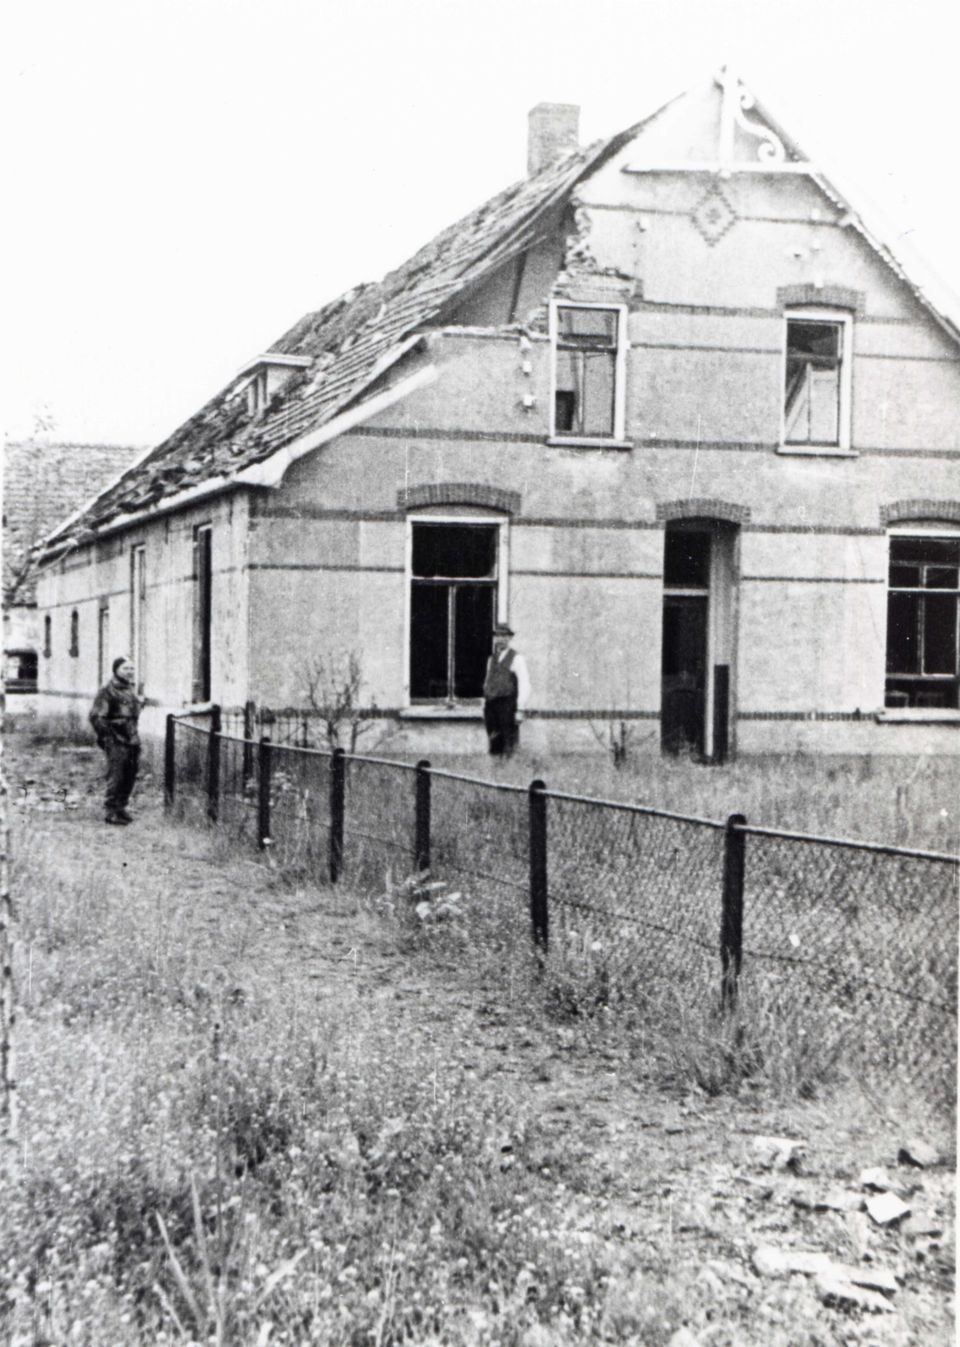 During a visit in 1945, Polish soldiers took this photo of the house of miller Beijer, Sosabowski's headquarters.